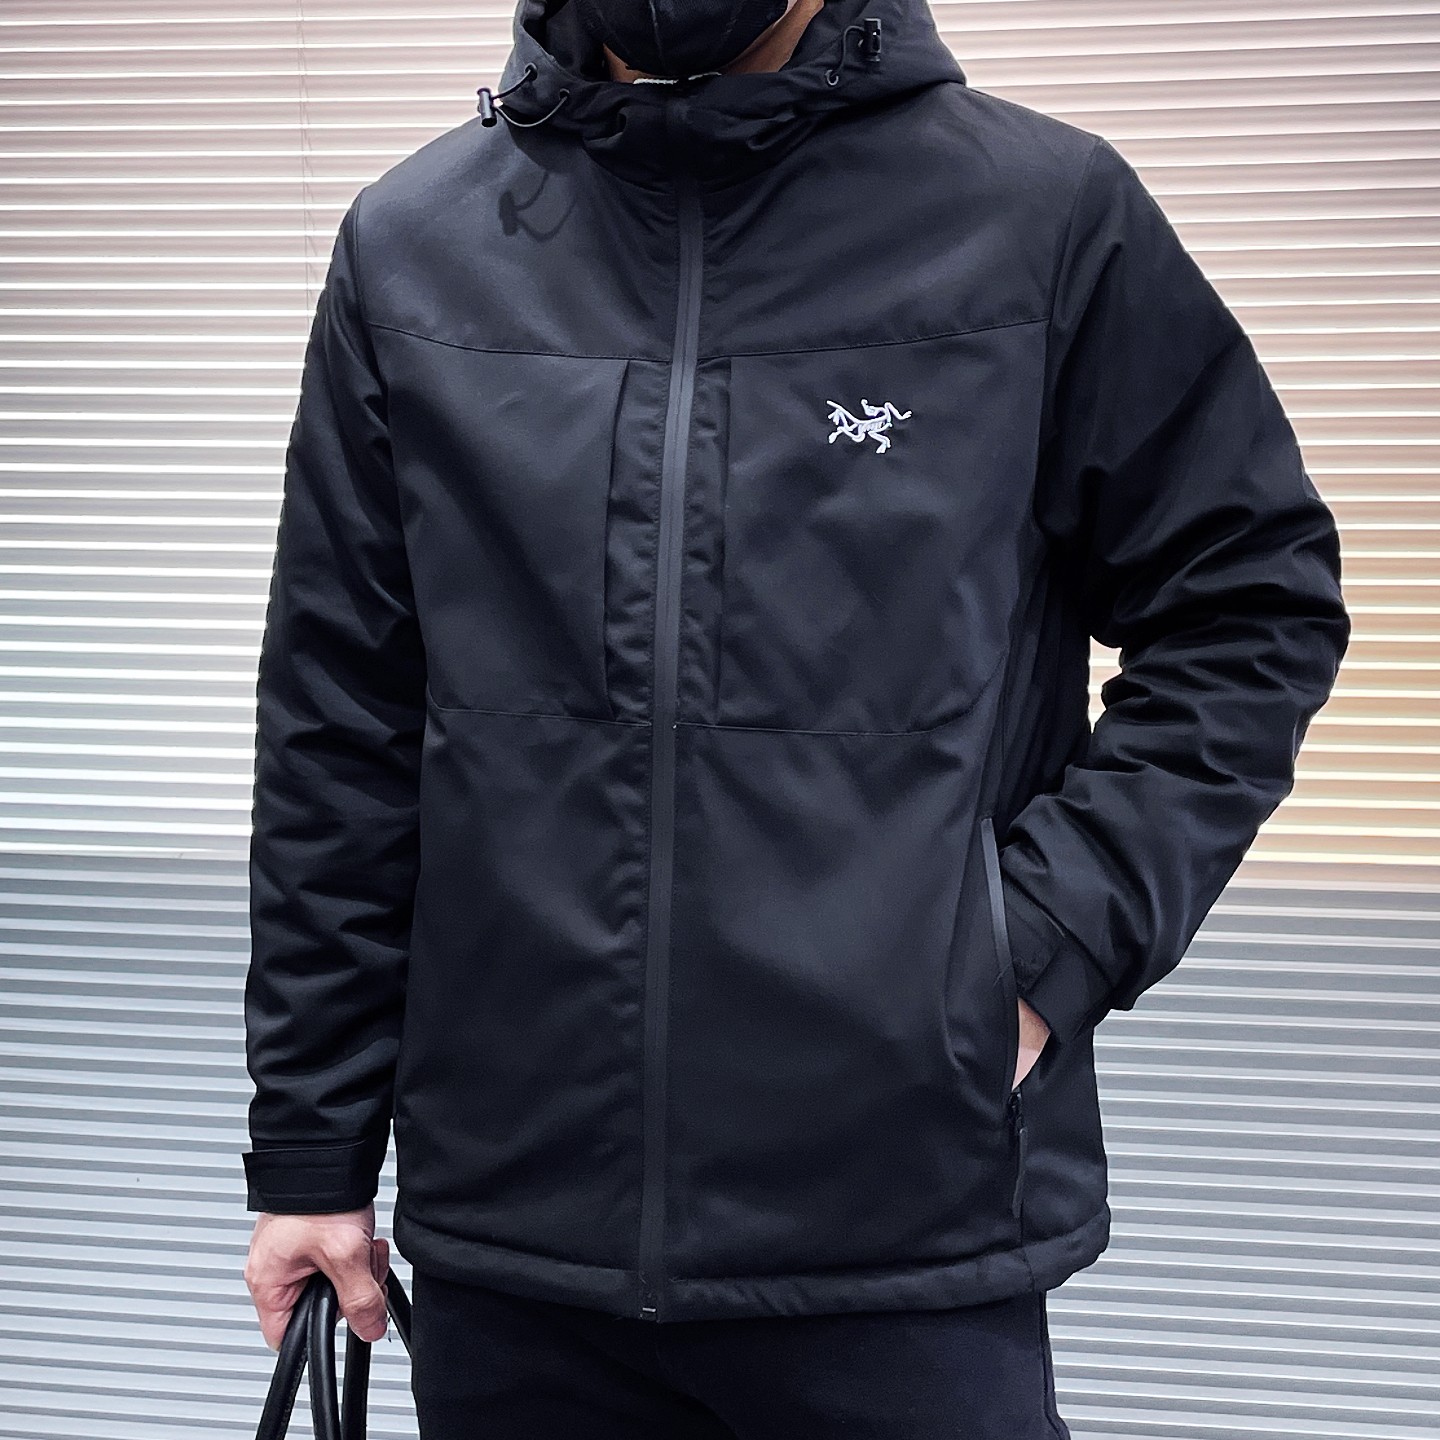 Arc’teryx New
 Clothing Coats & Jackets Embroidery Men Cotton Spring/Fall Collection Fashion